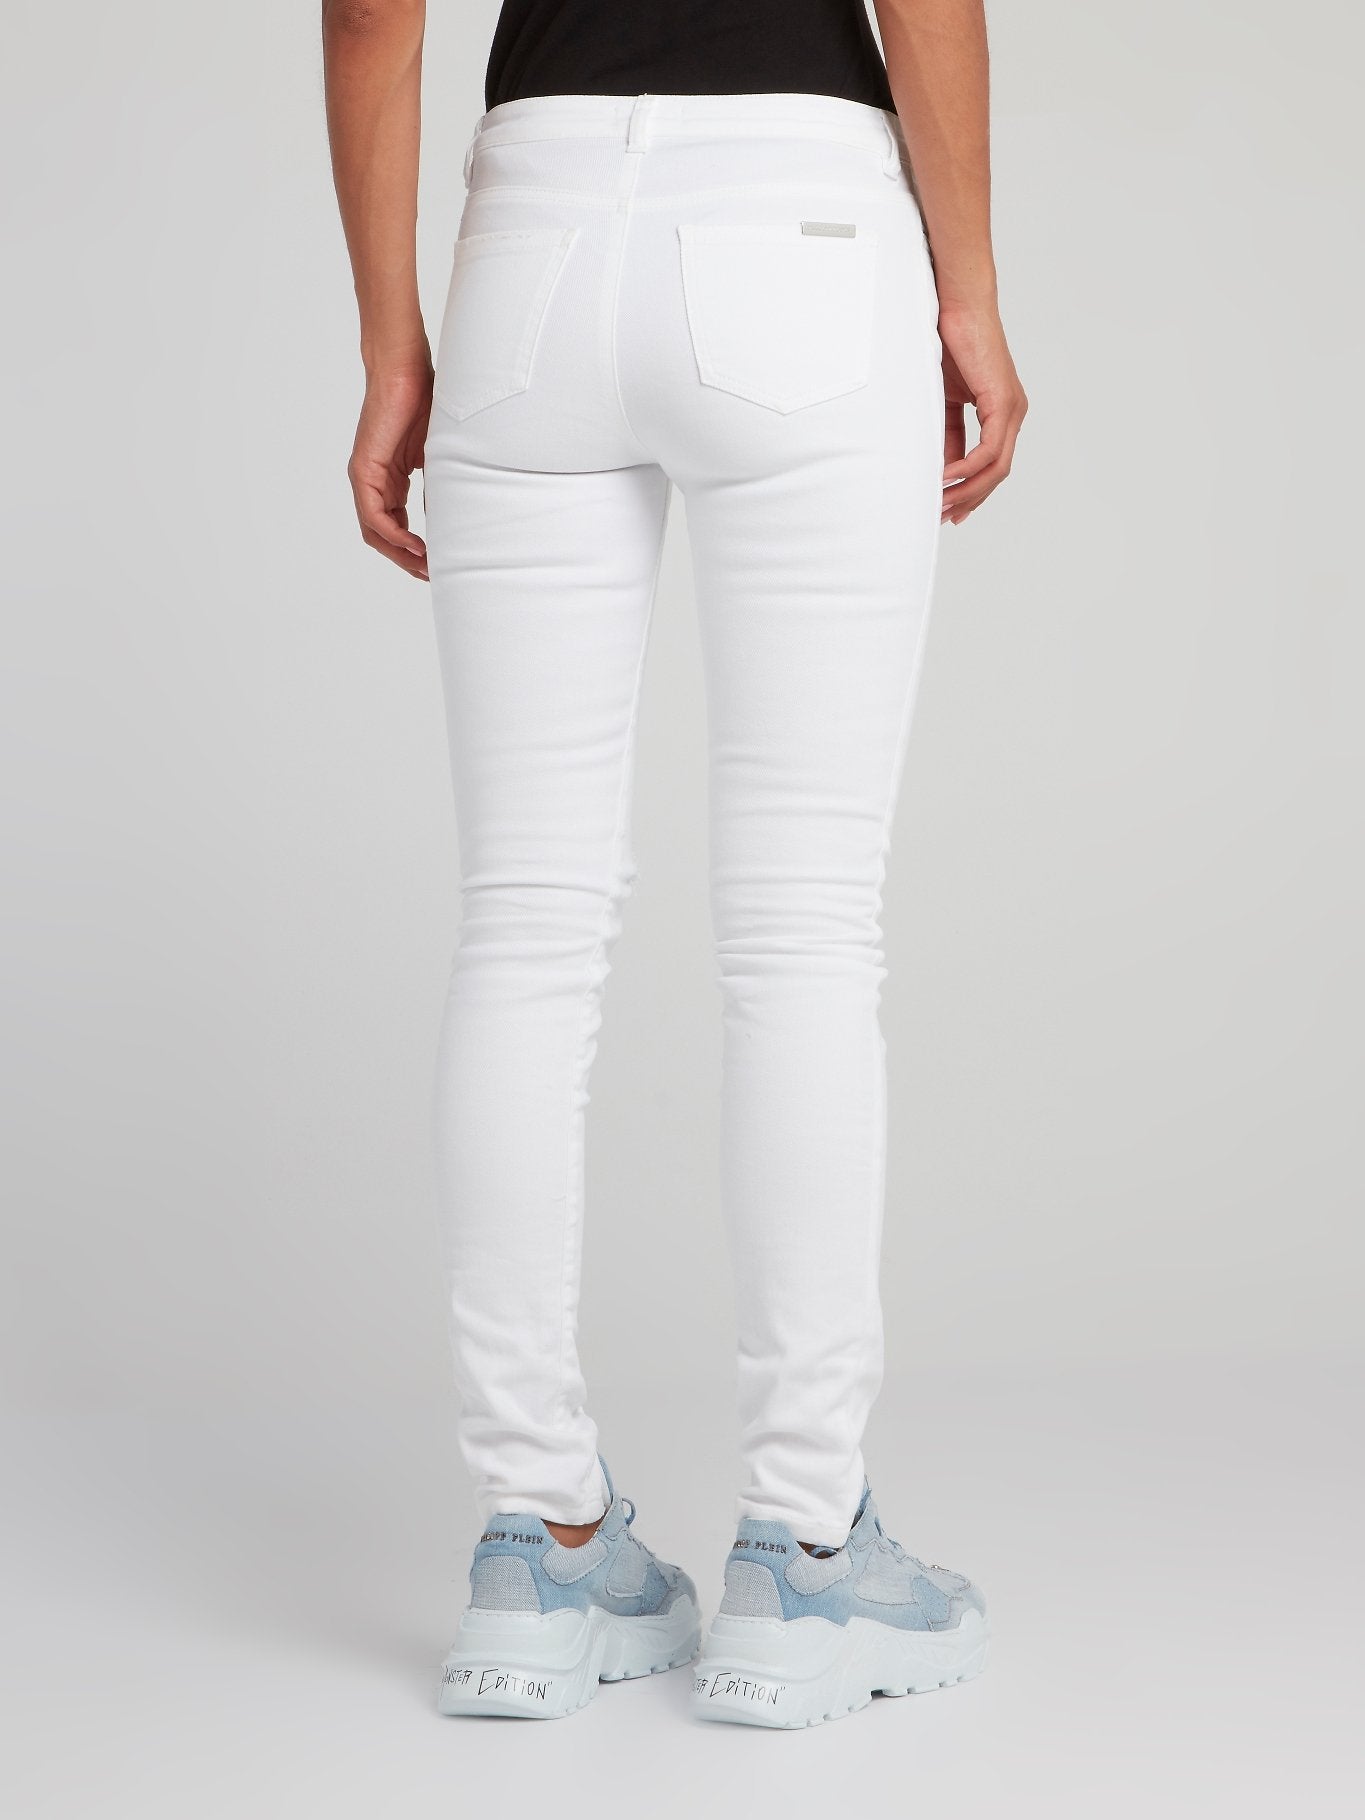 White Distressed Slim Fit Jeans